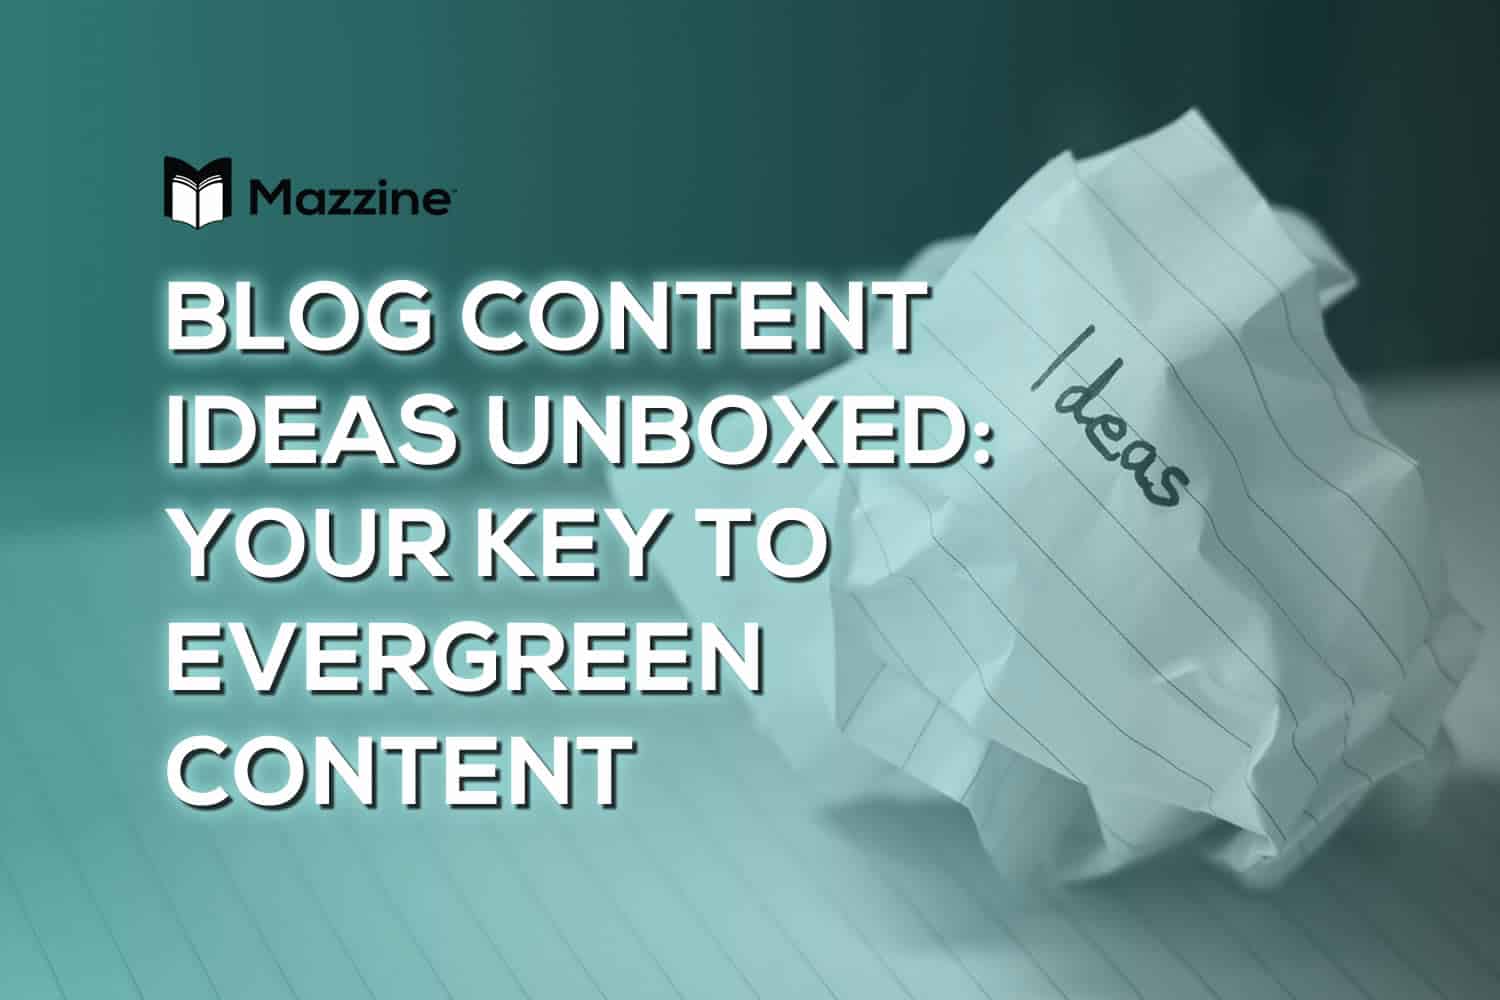 Blog Content Ideas Unboxed - Your Key to Evergreen and Click-Worthy Topics